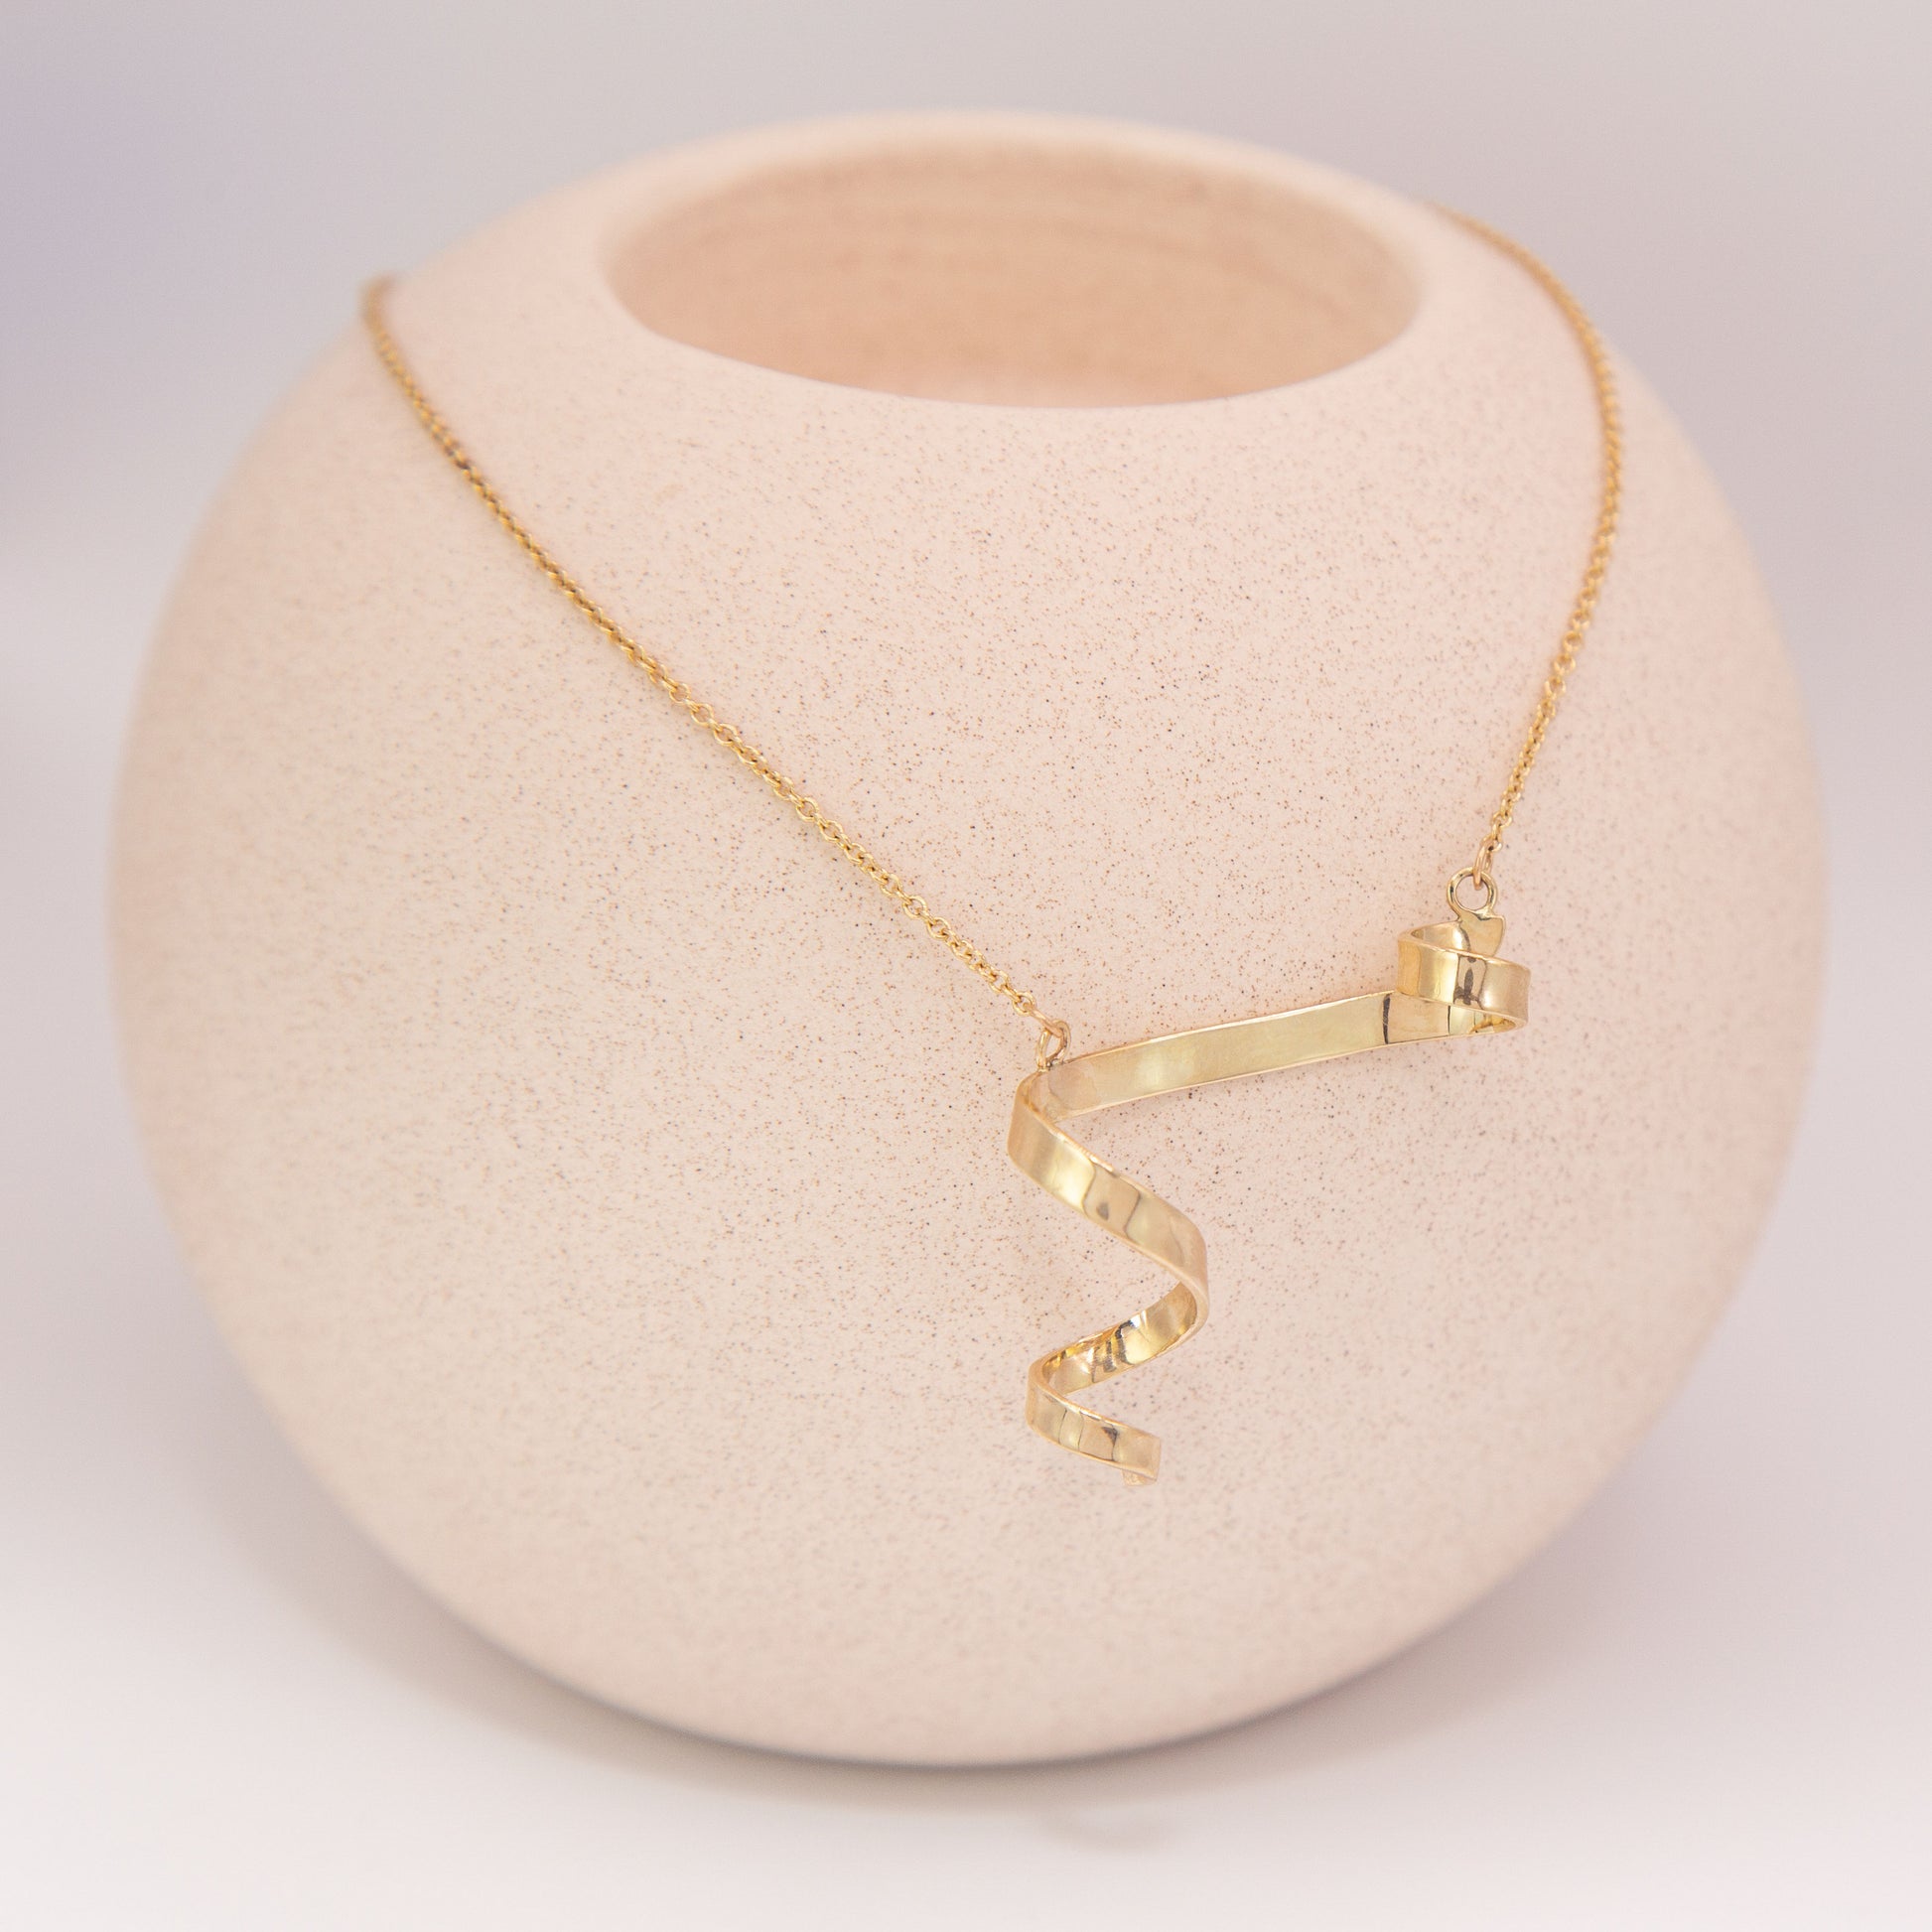 gold spiral necklace, curly jewelry, helix necklace, whimsical jewelry, unique jewellery, art jewellery 